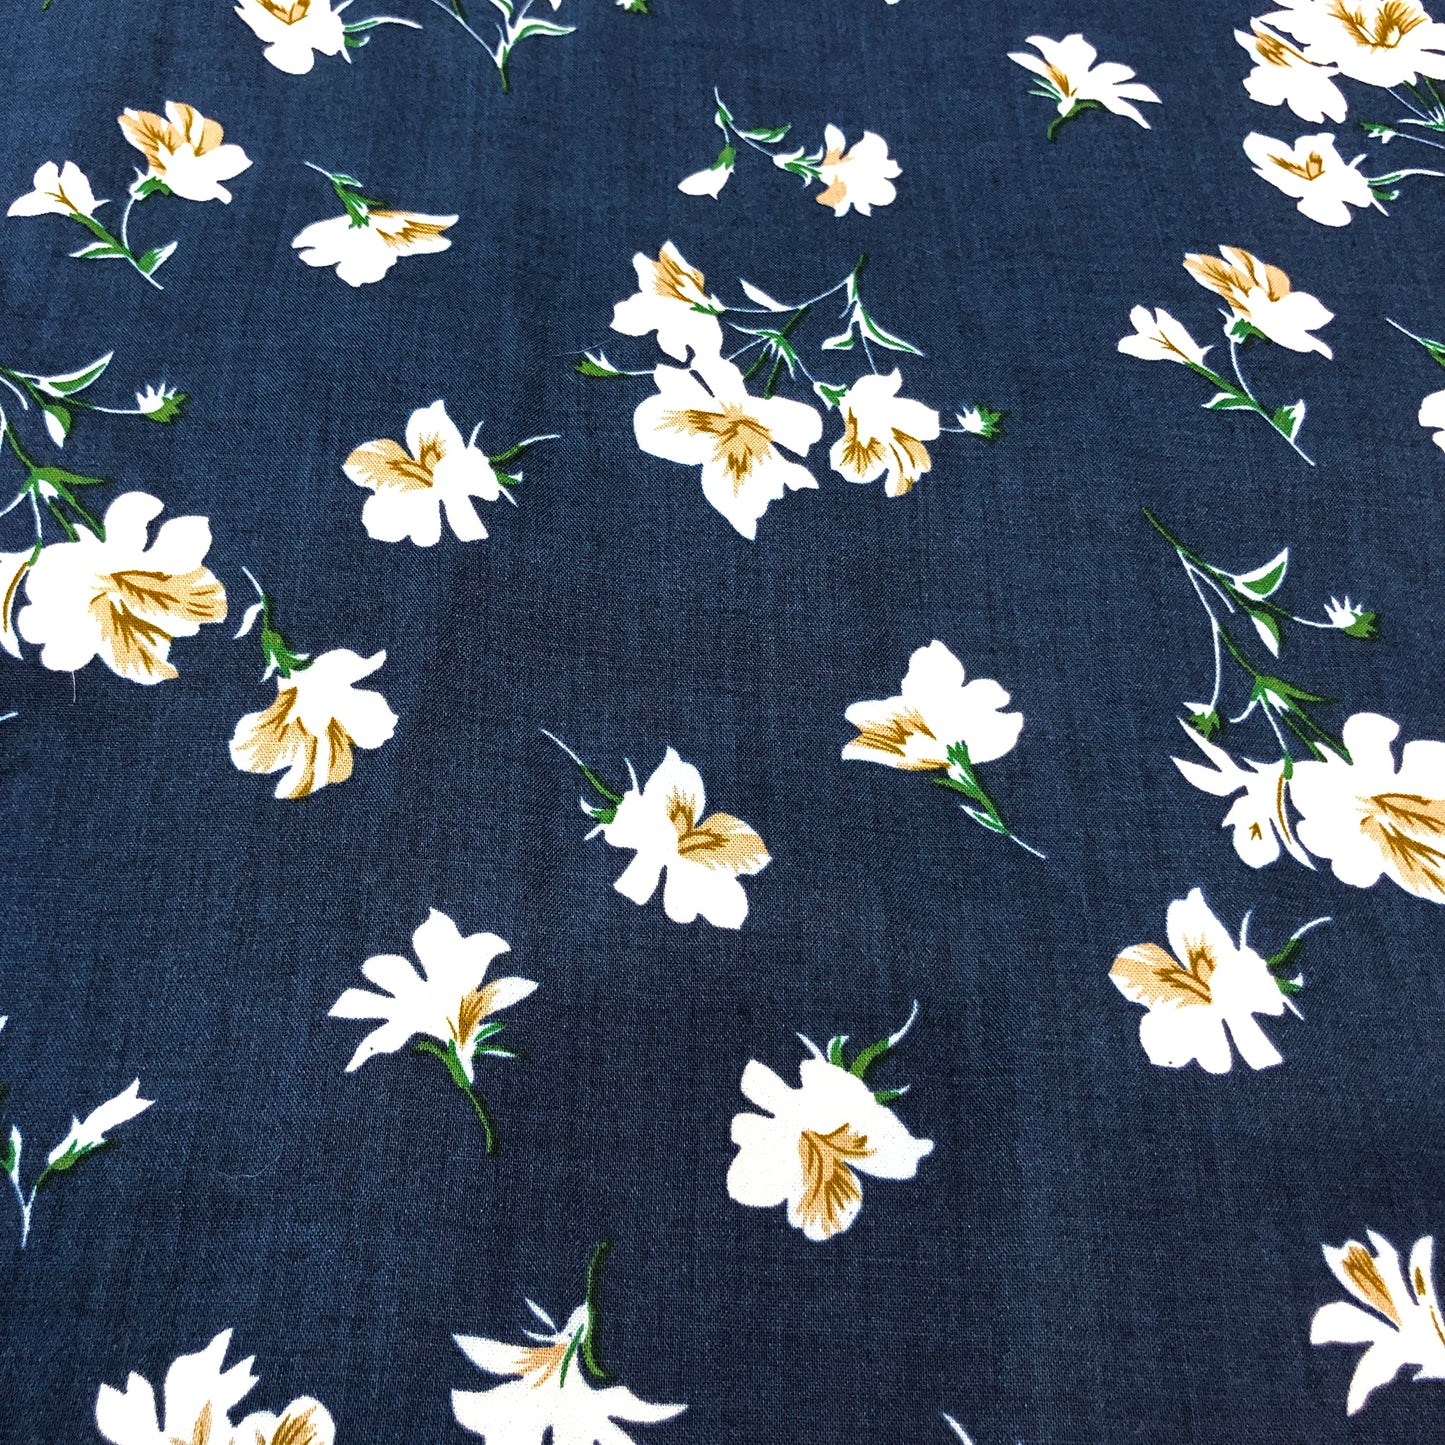 Navy Blue Floral Cotton Fabric